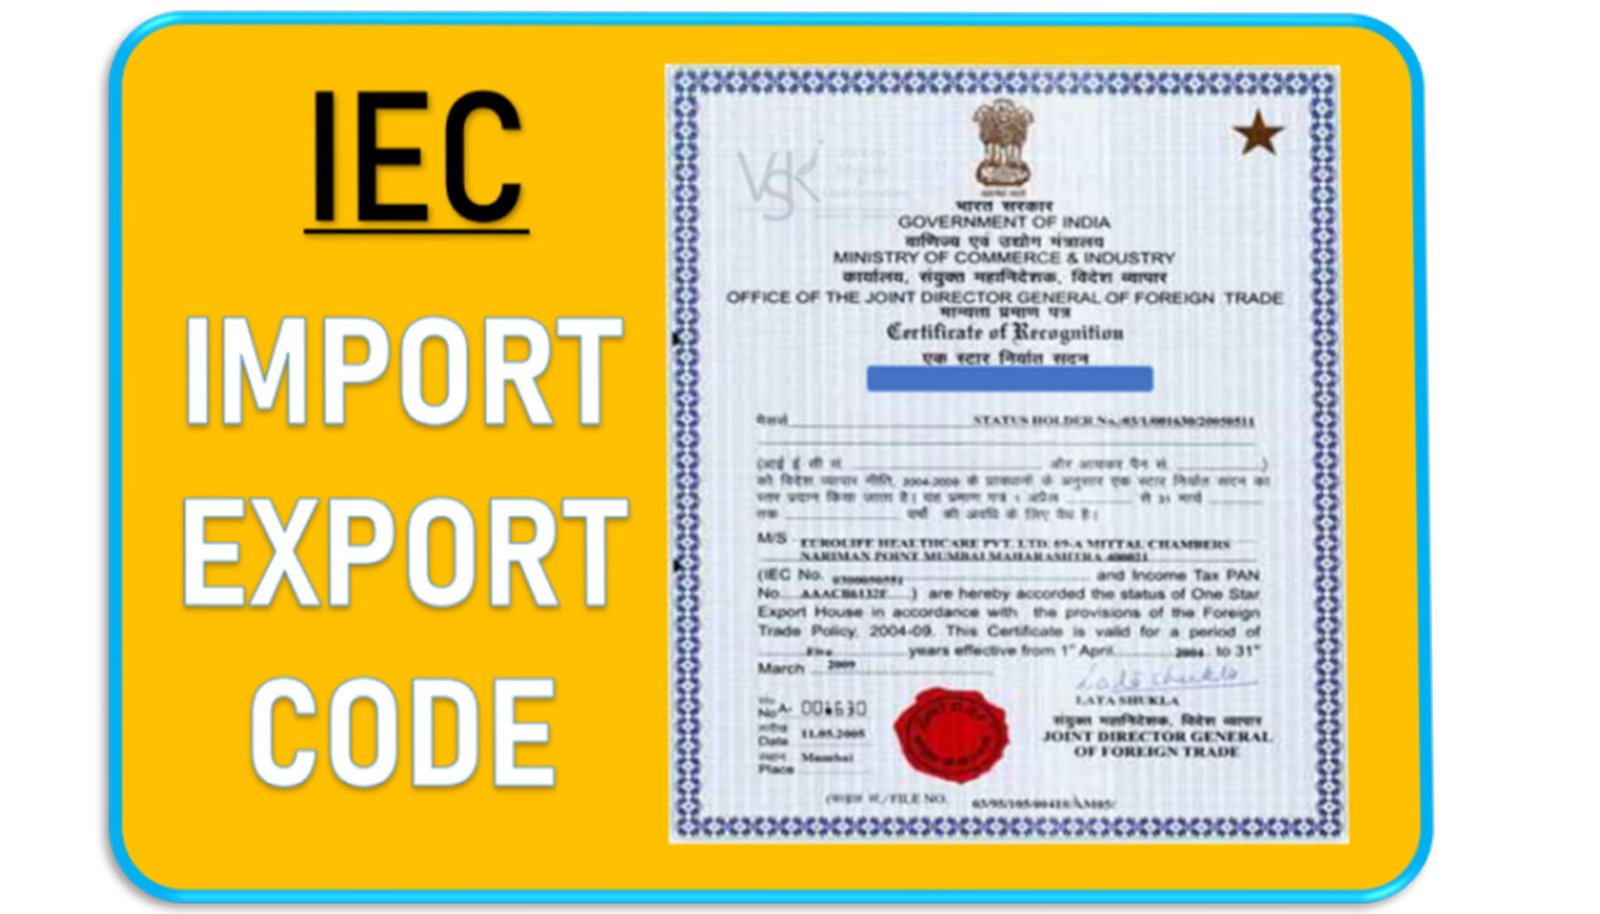 Necessary documents for customs clearance in India